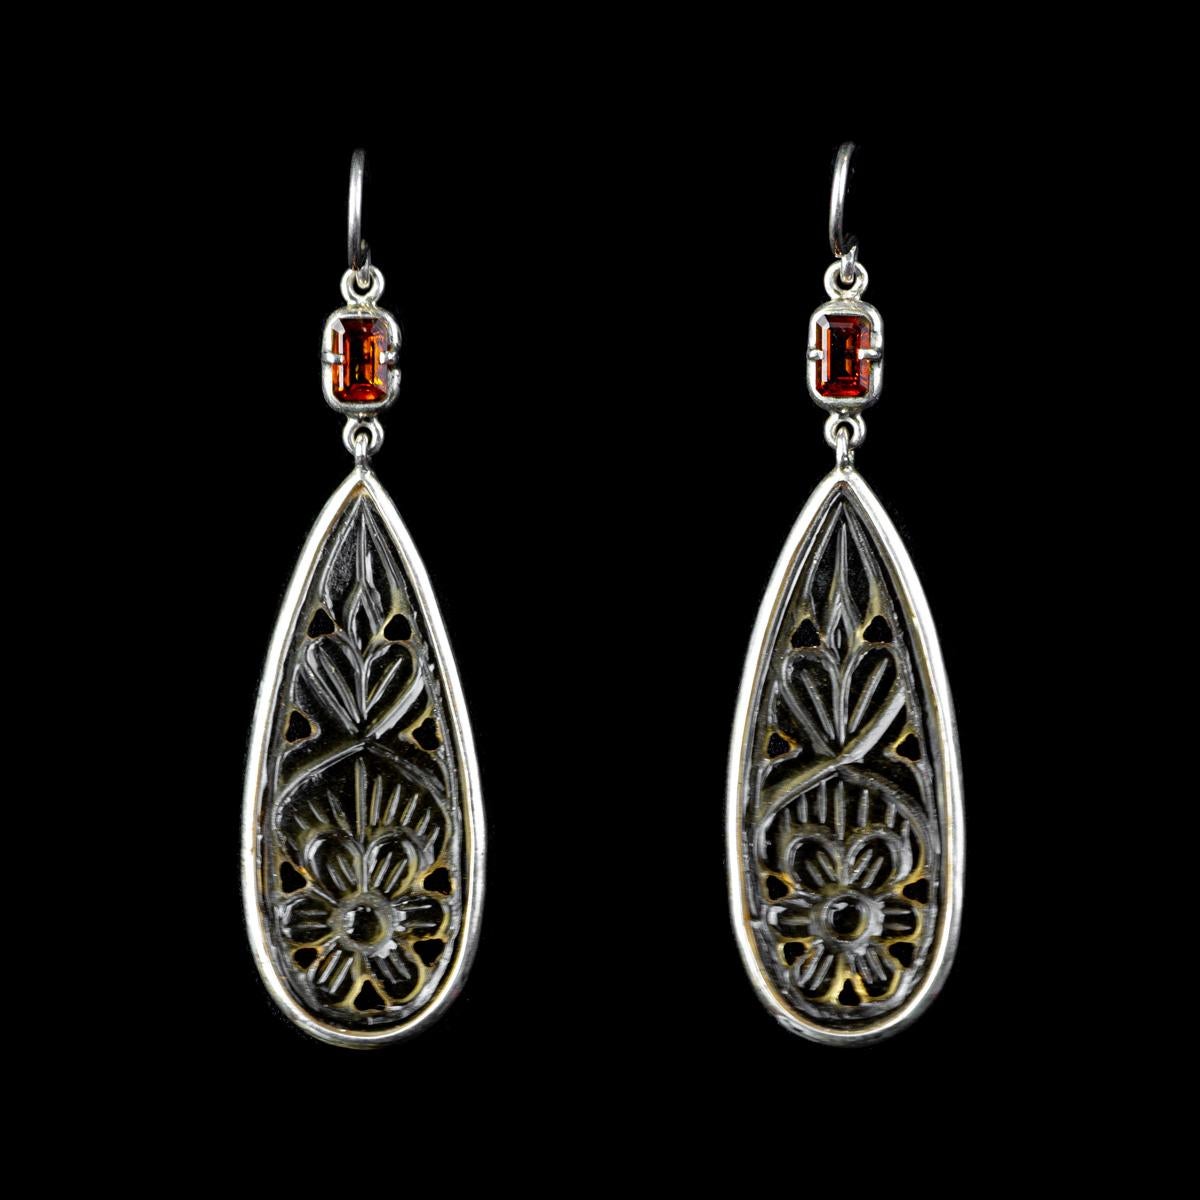 925 silver earrings with handcrafted glass element and ct 1,40 cognac topazes, with an intense shine and great brightness. A touch of beauty that creates an aura around you. Topaz is among the most ancient and desired precious stones, the facets